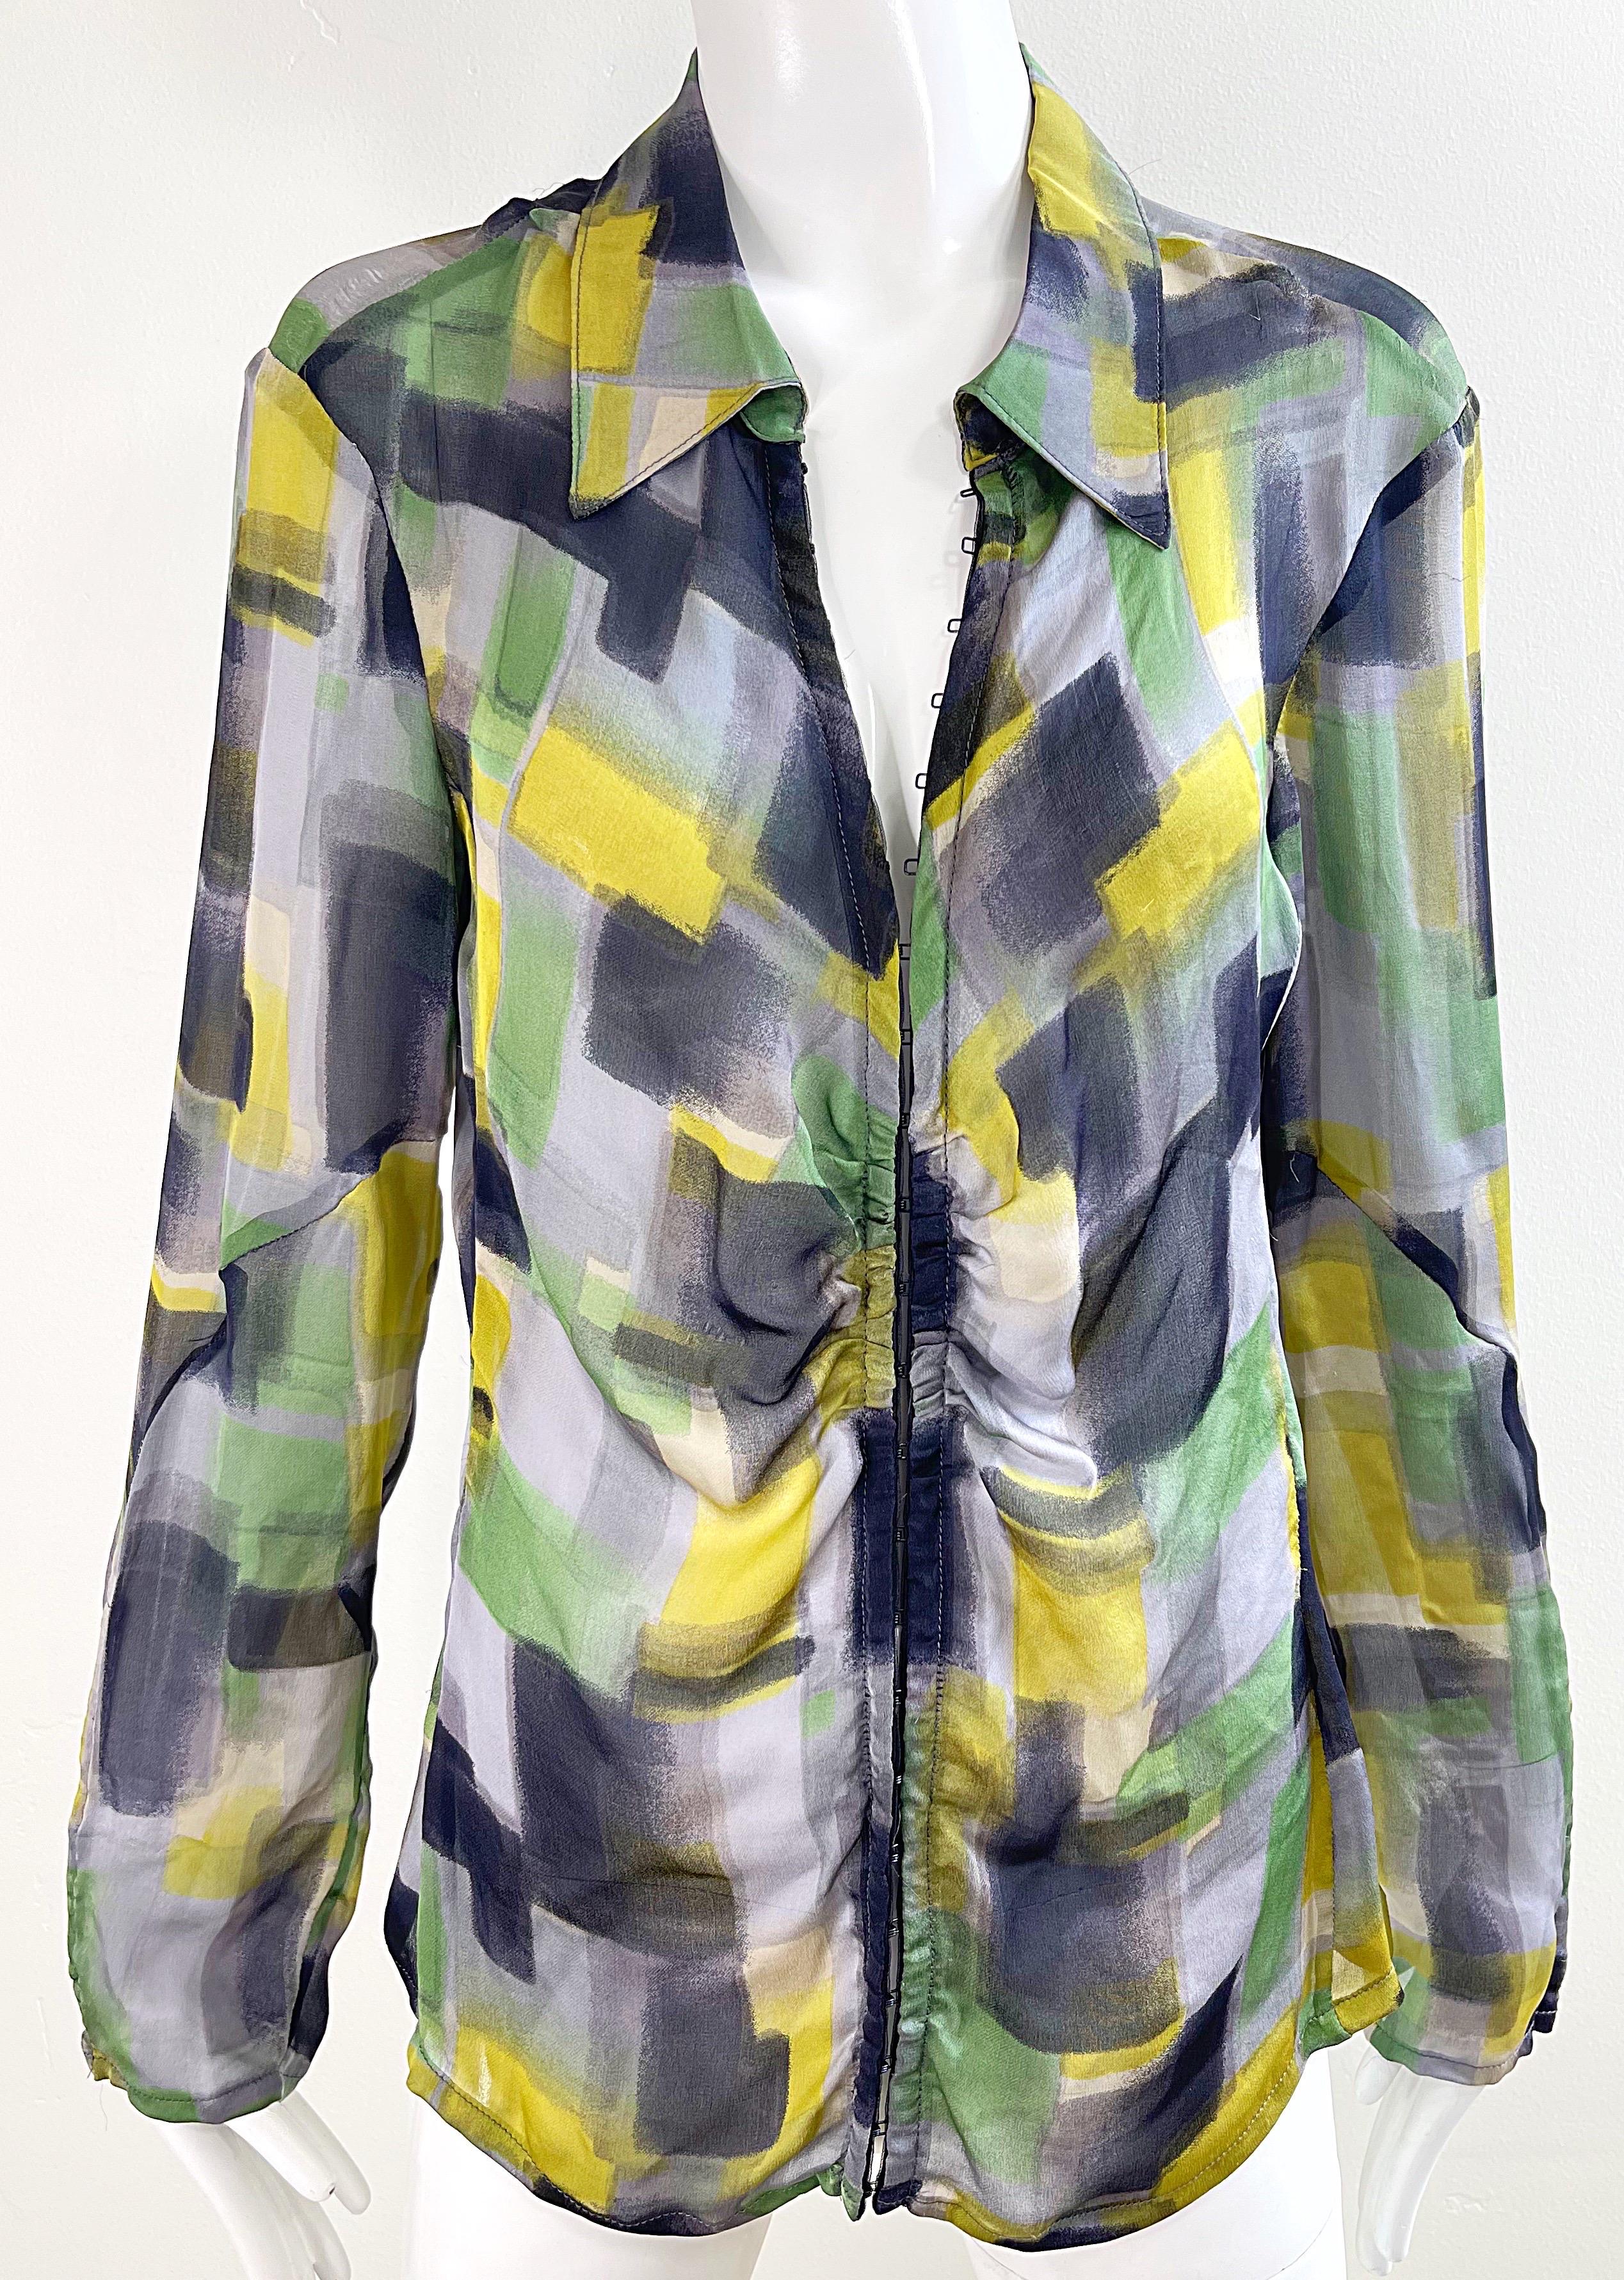 NWT Zenobia Saks 5th Avenue Size 12 Sheer Silk Chiffon Abstract Print Blouse Top For Sale 15